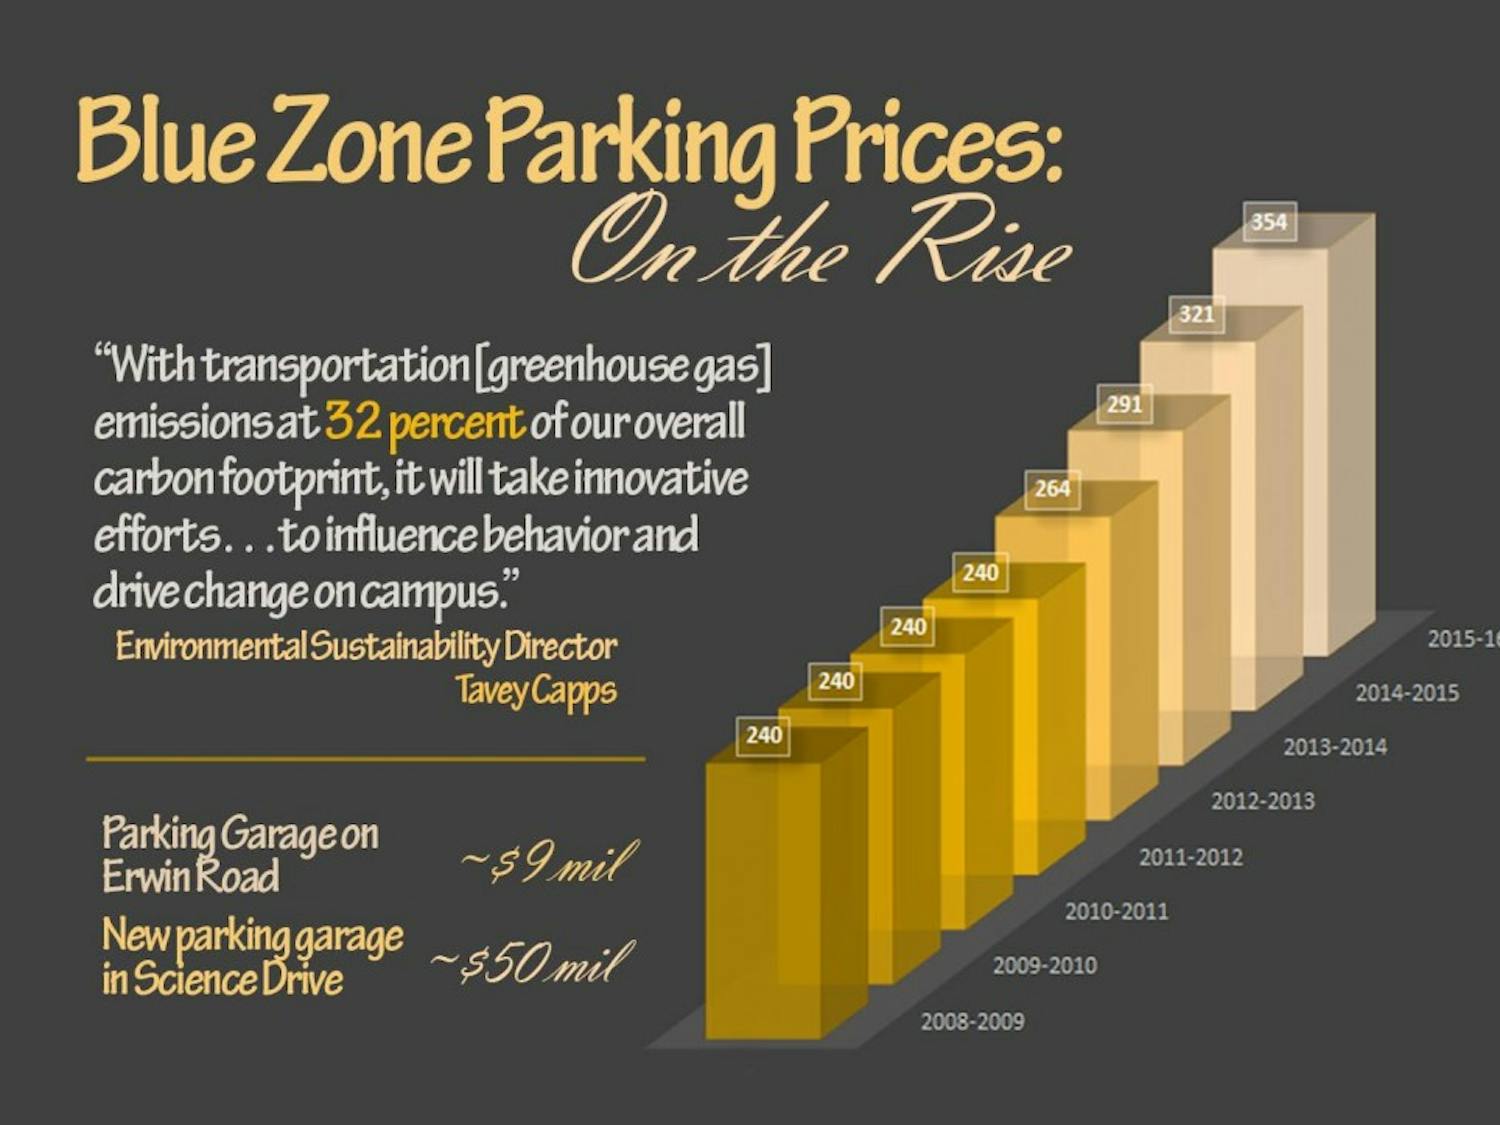 After remaining relatively constant from 2008-2011, parking prices have soared in recent years.